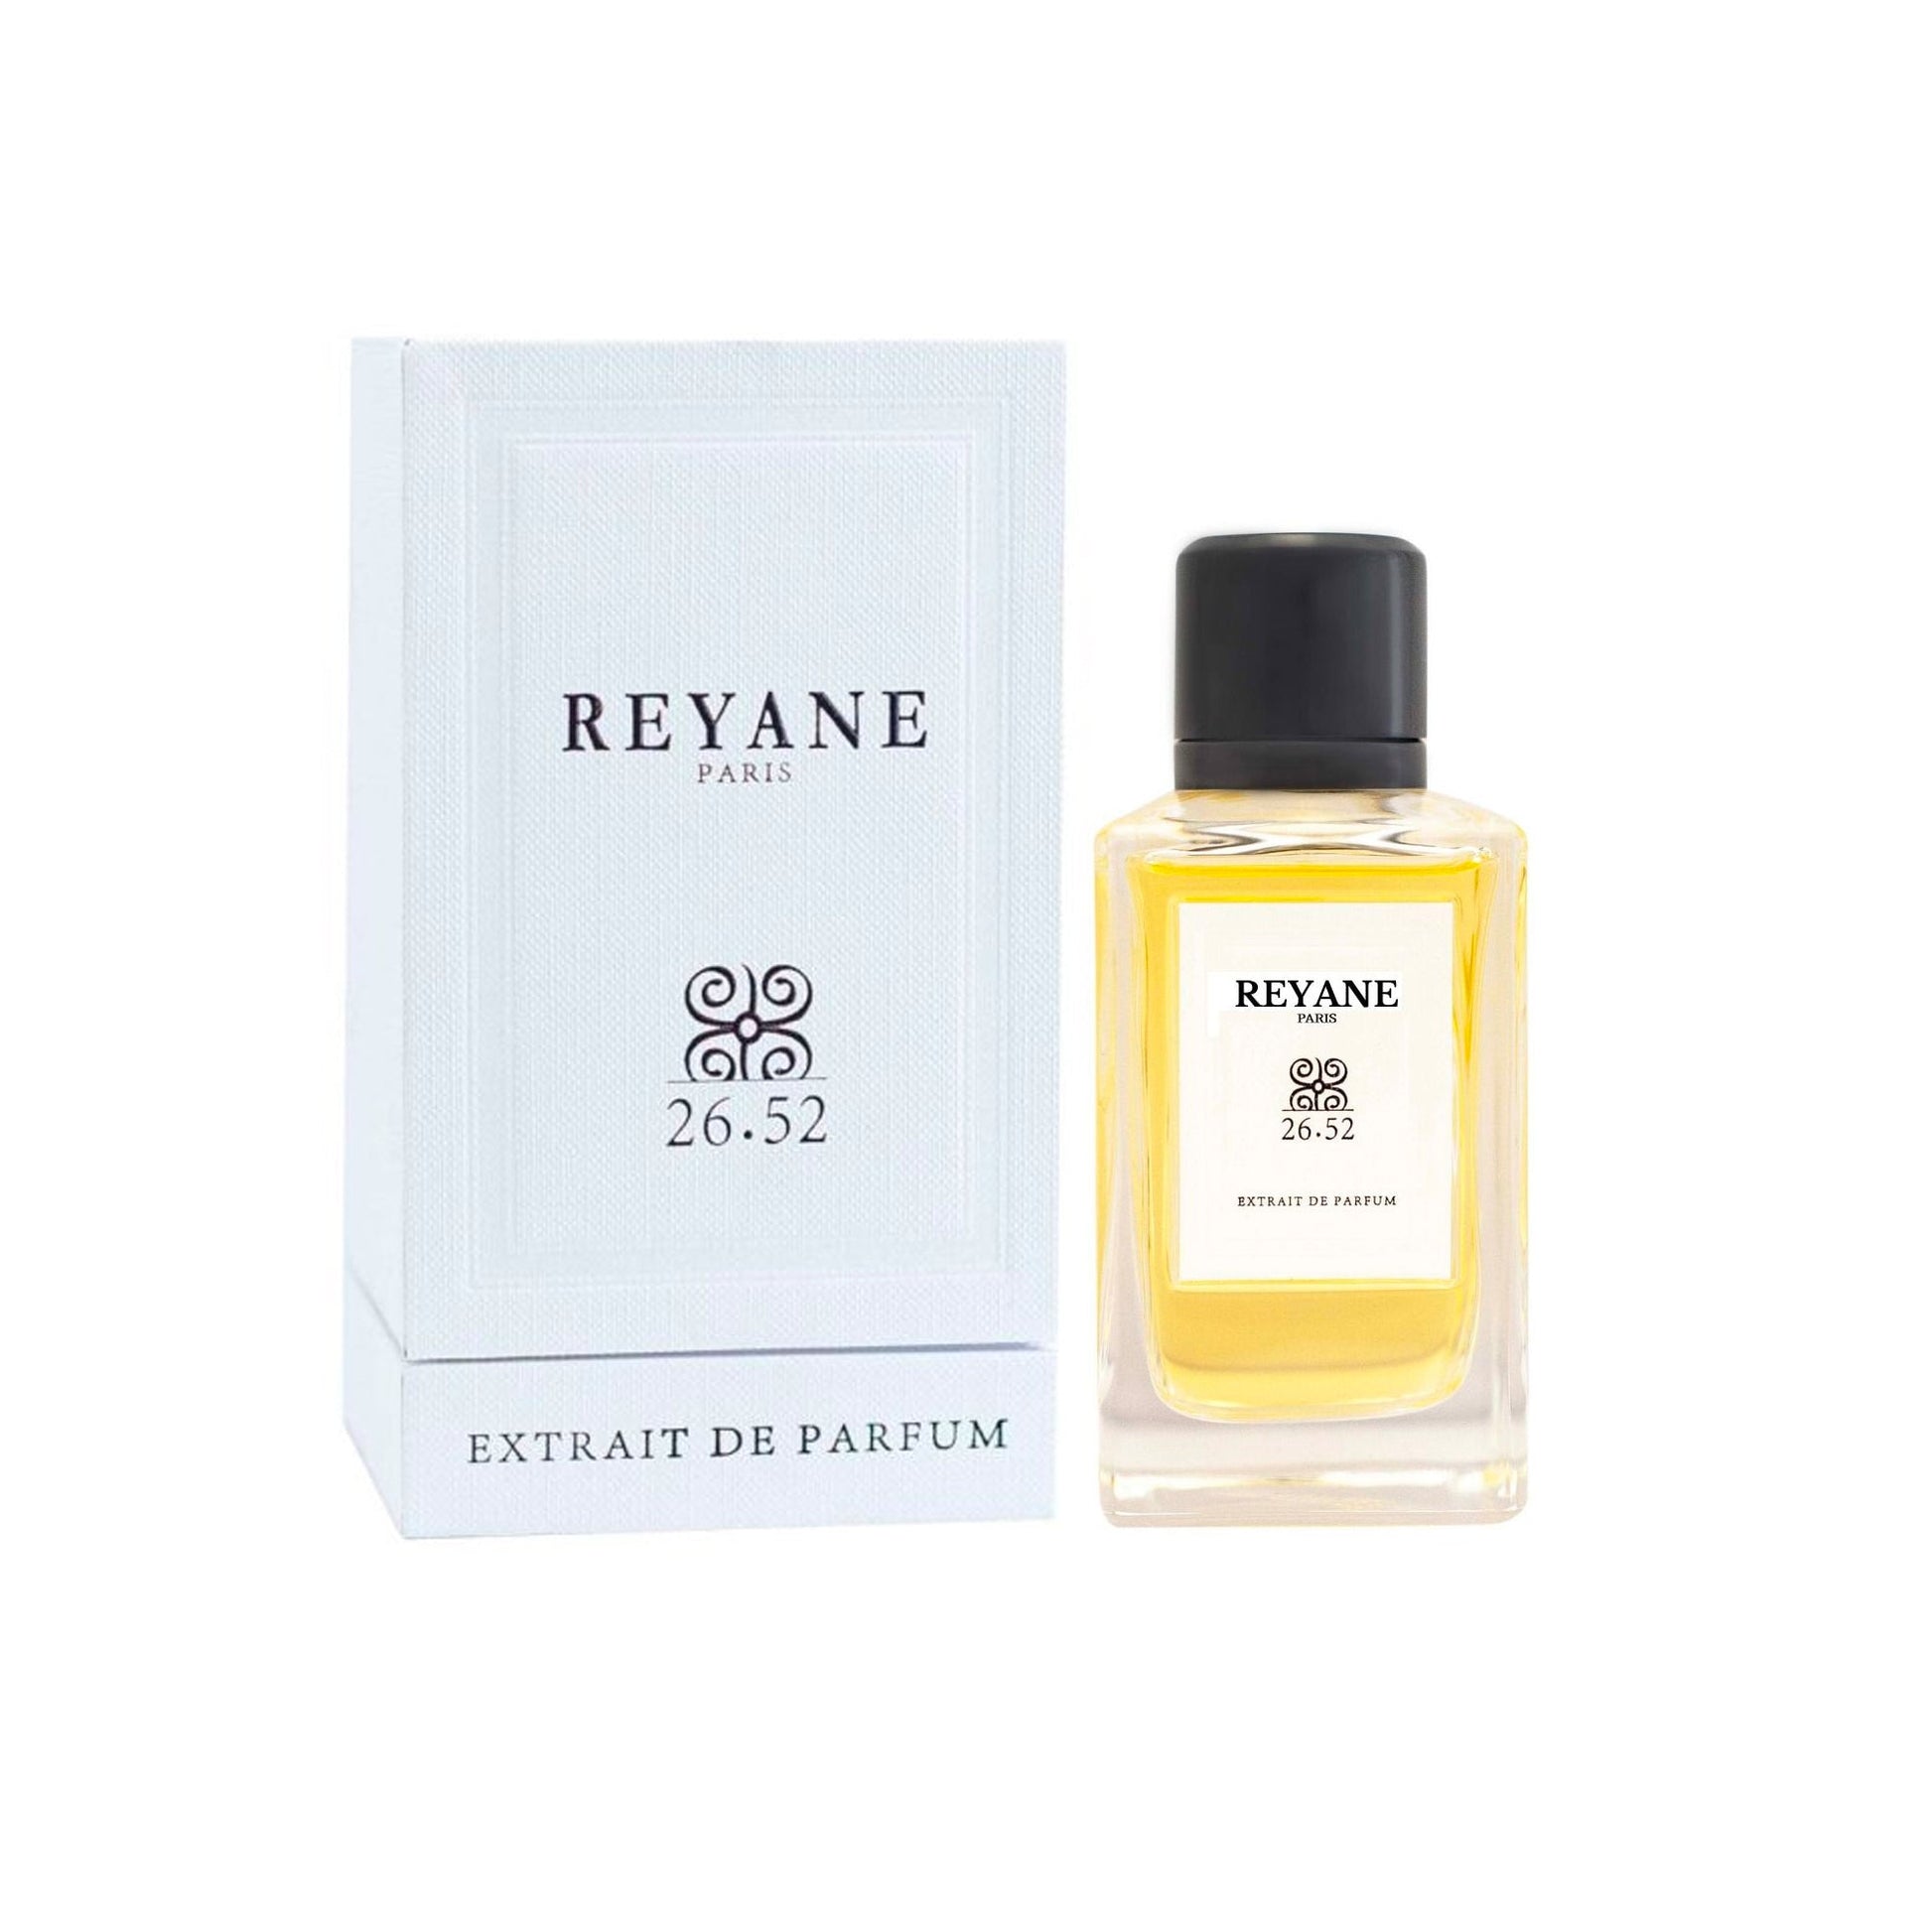 26.52 Extrait De Parfum Spray for Men by Reyane Tradition, Product image 1